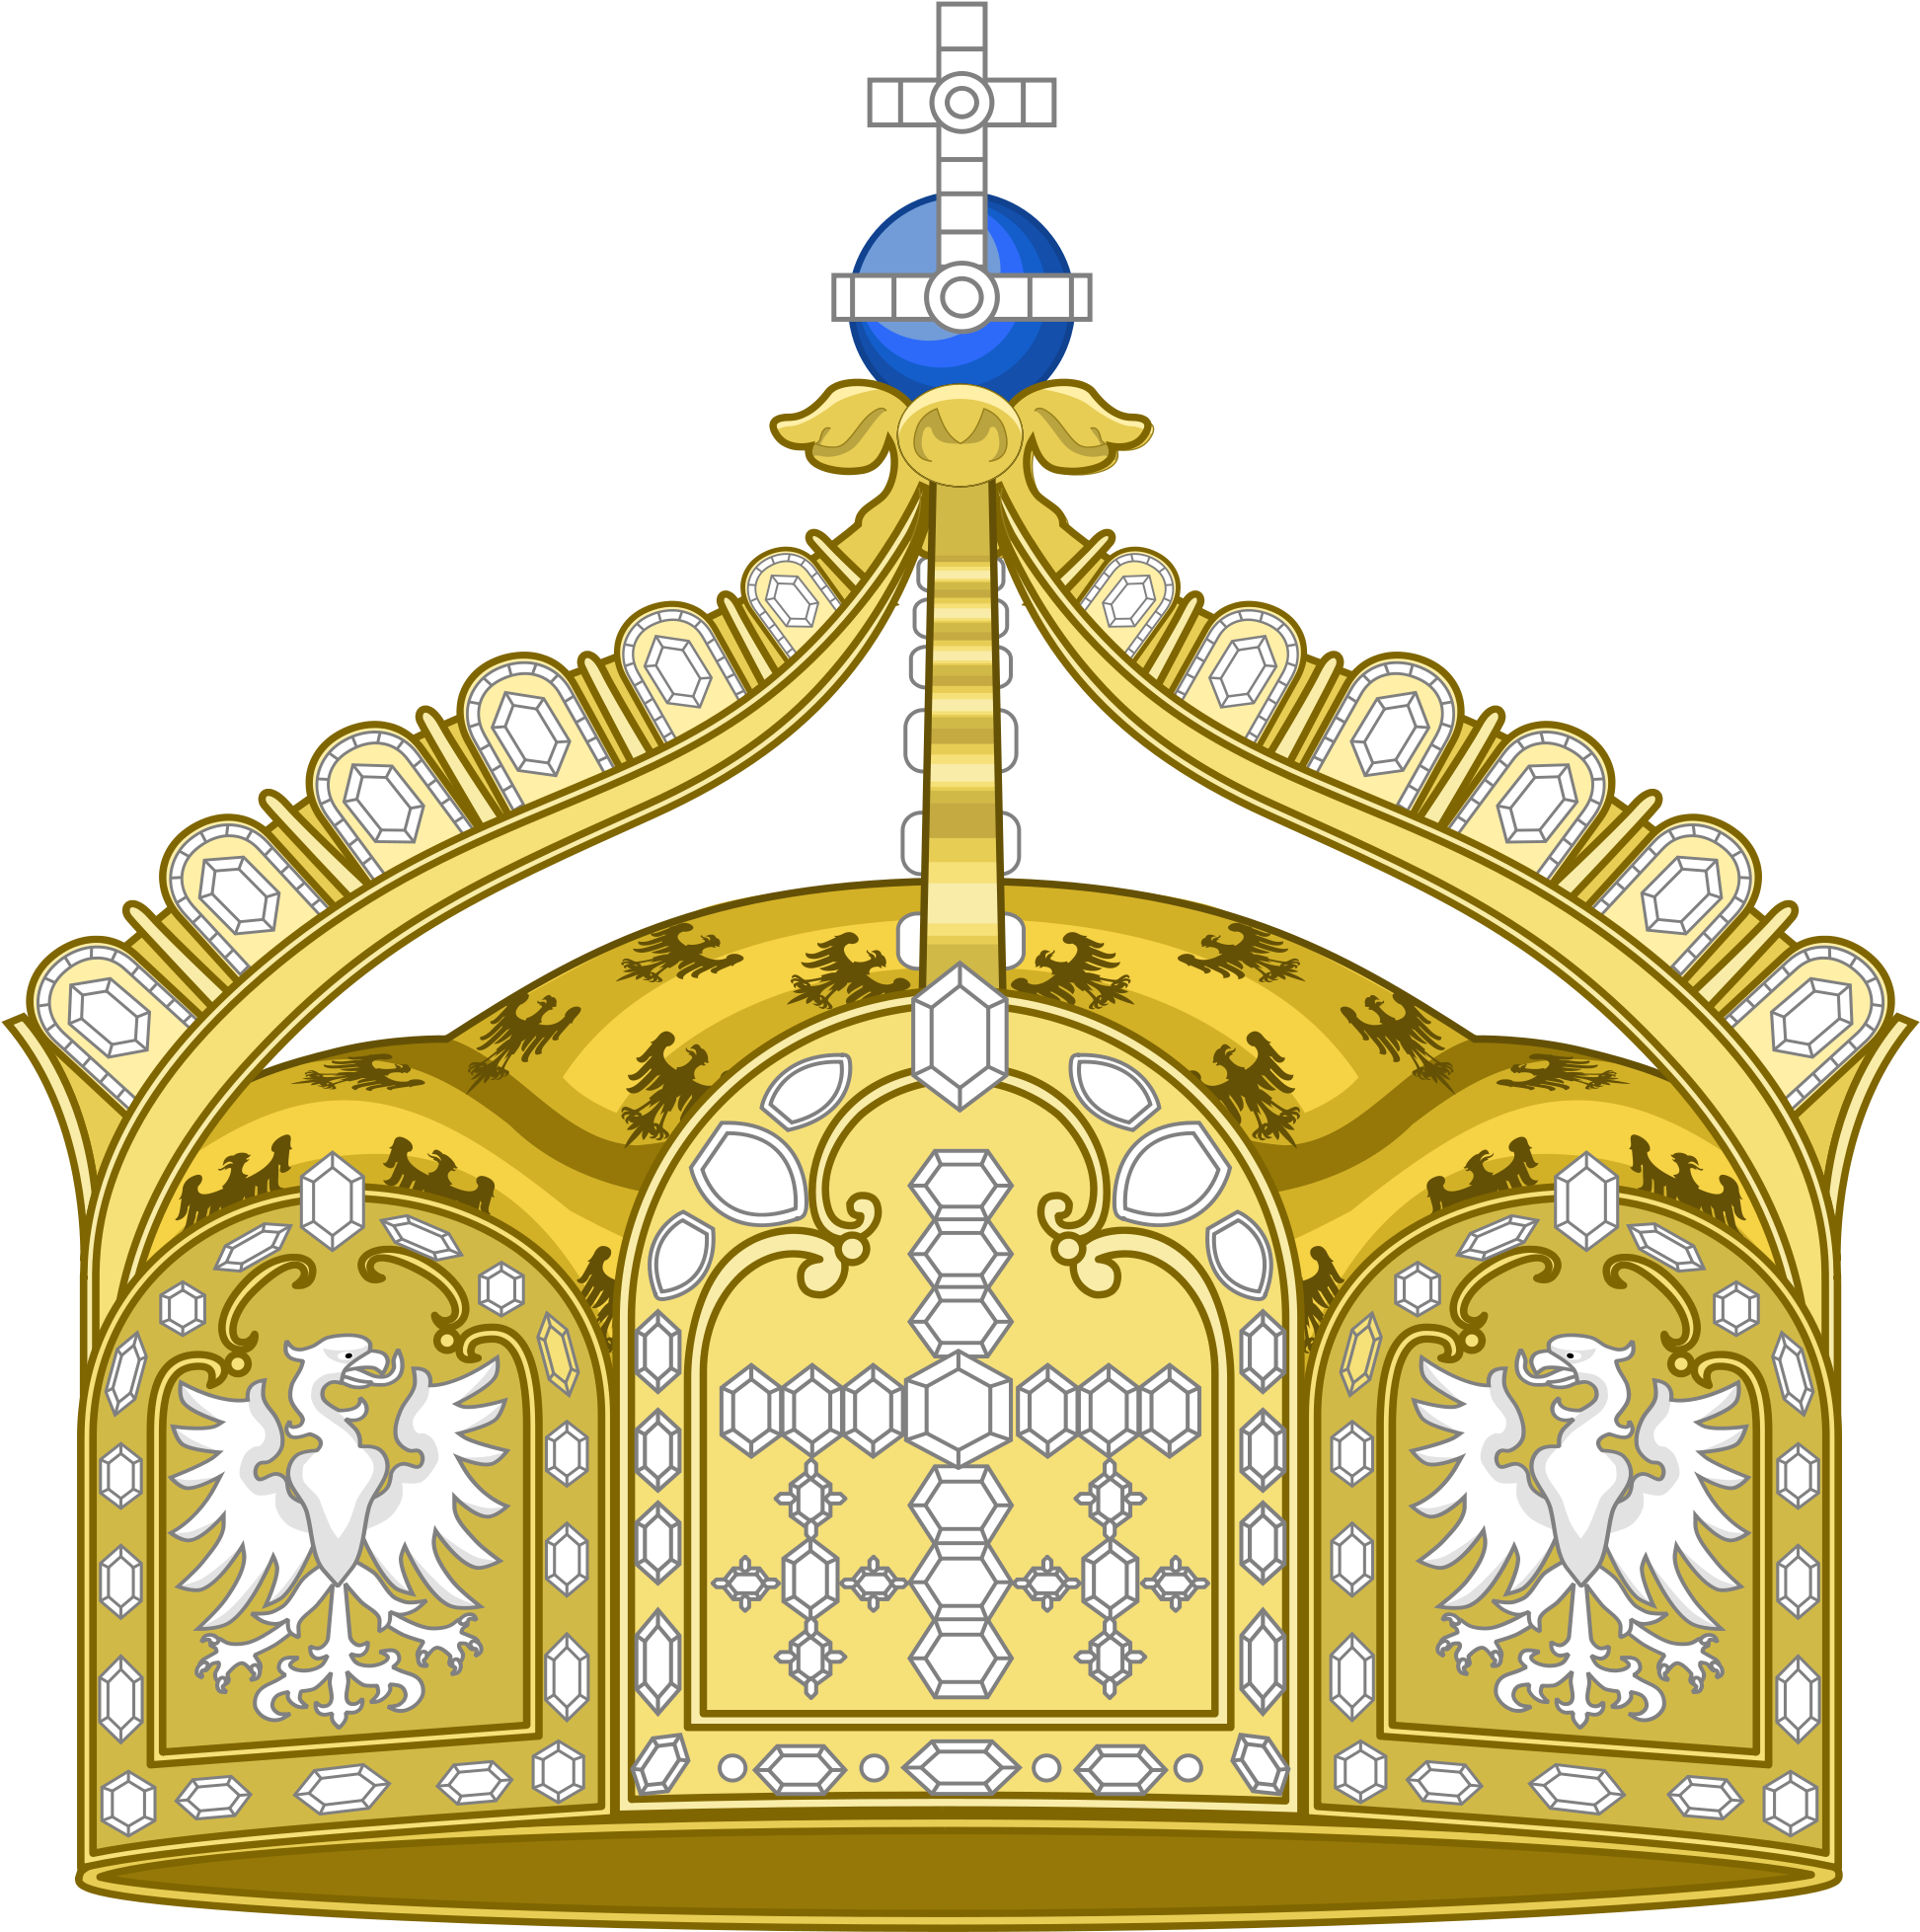 State Crown Of The German Empire - German National People's Party (2000x2000)